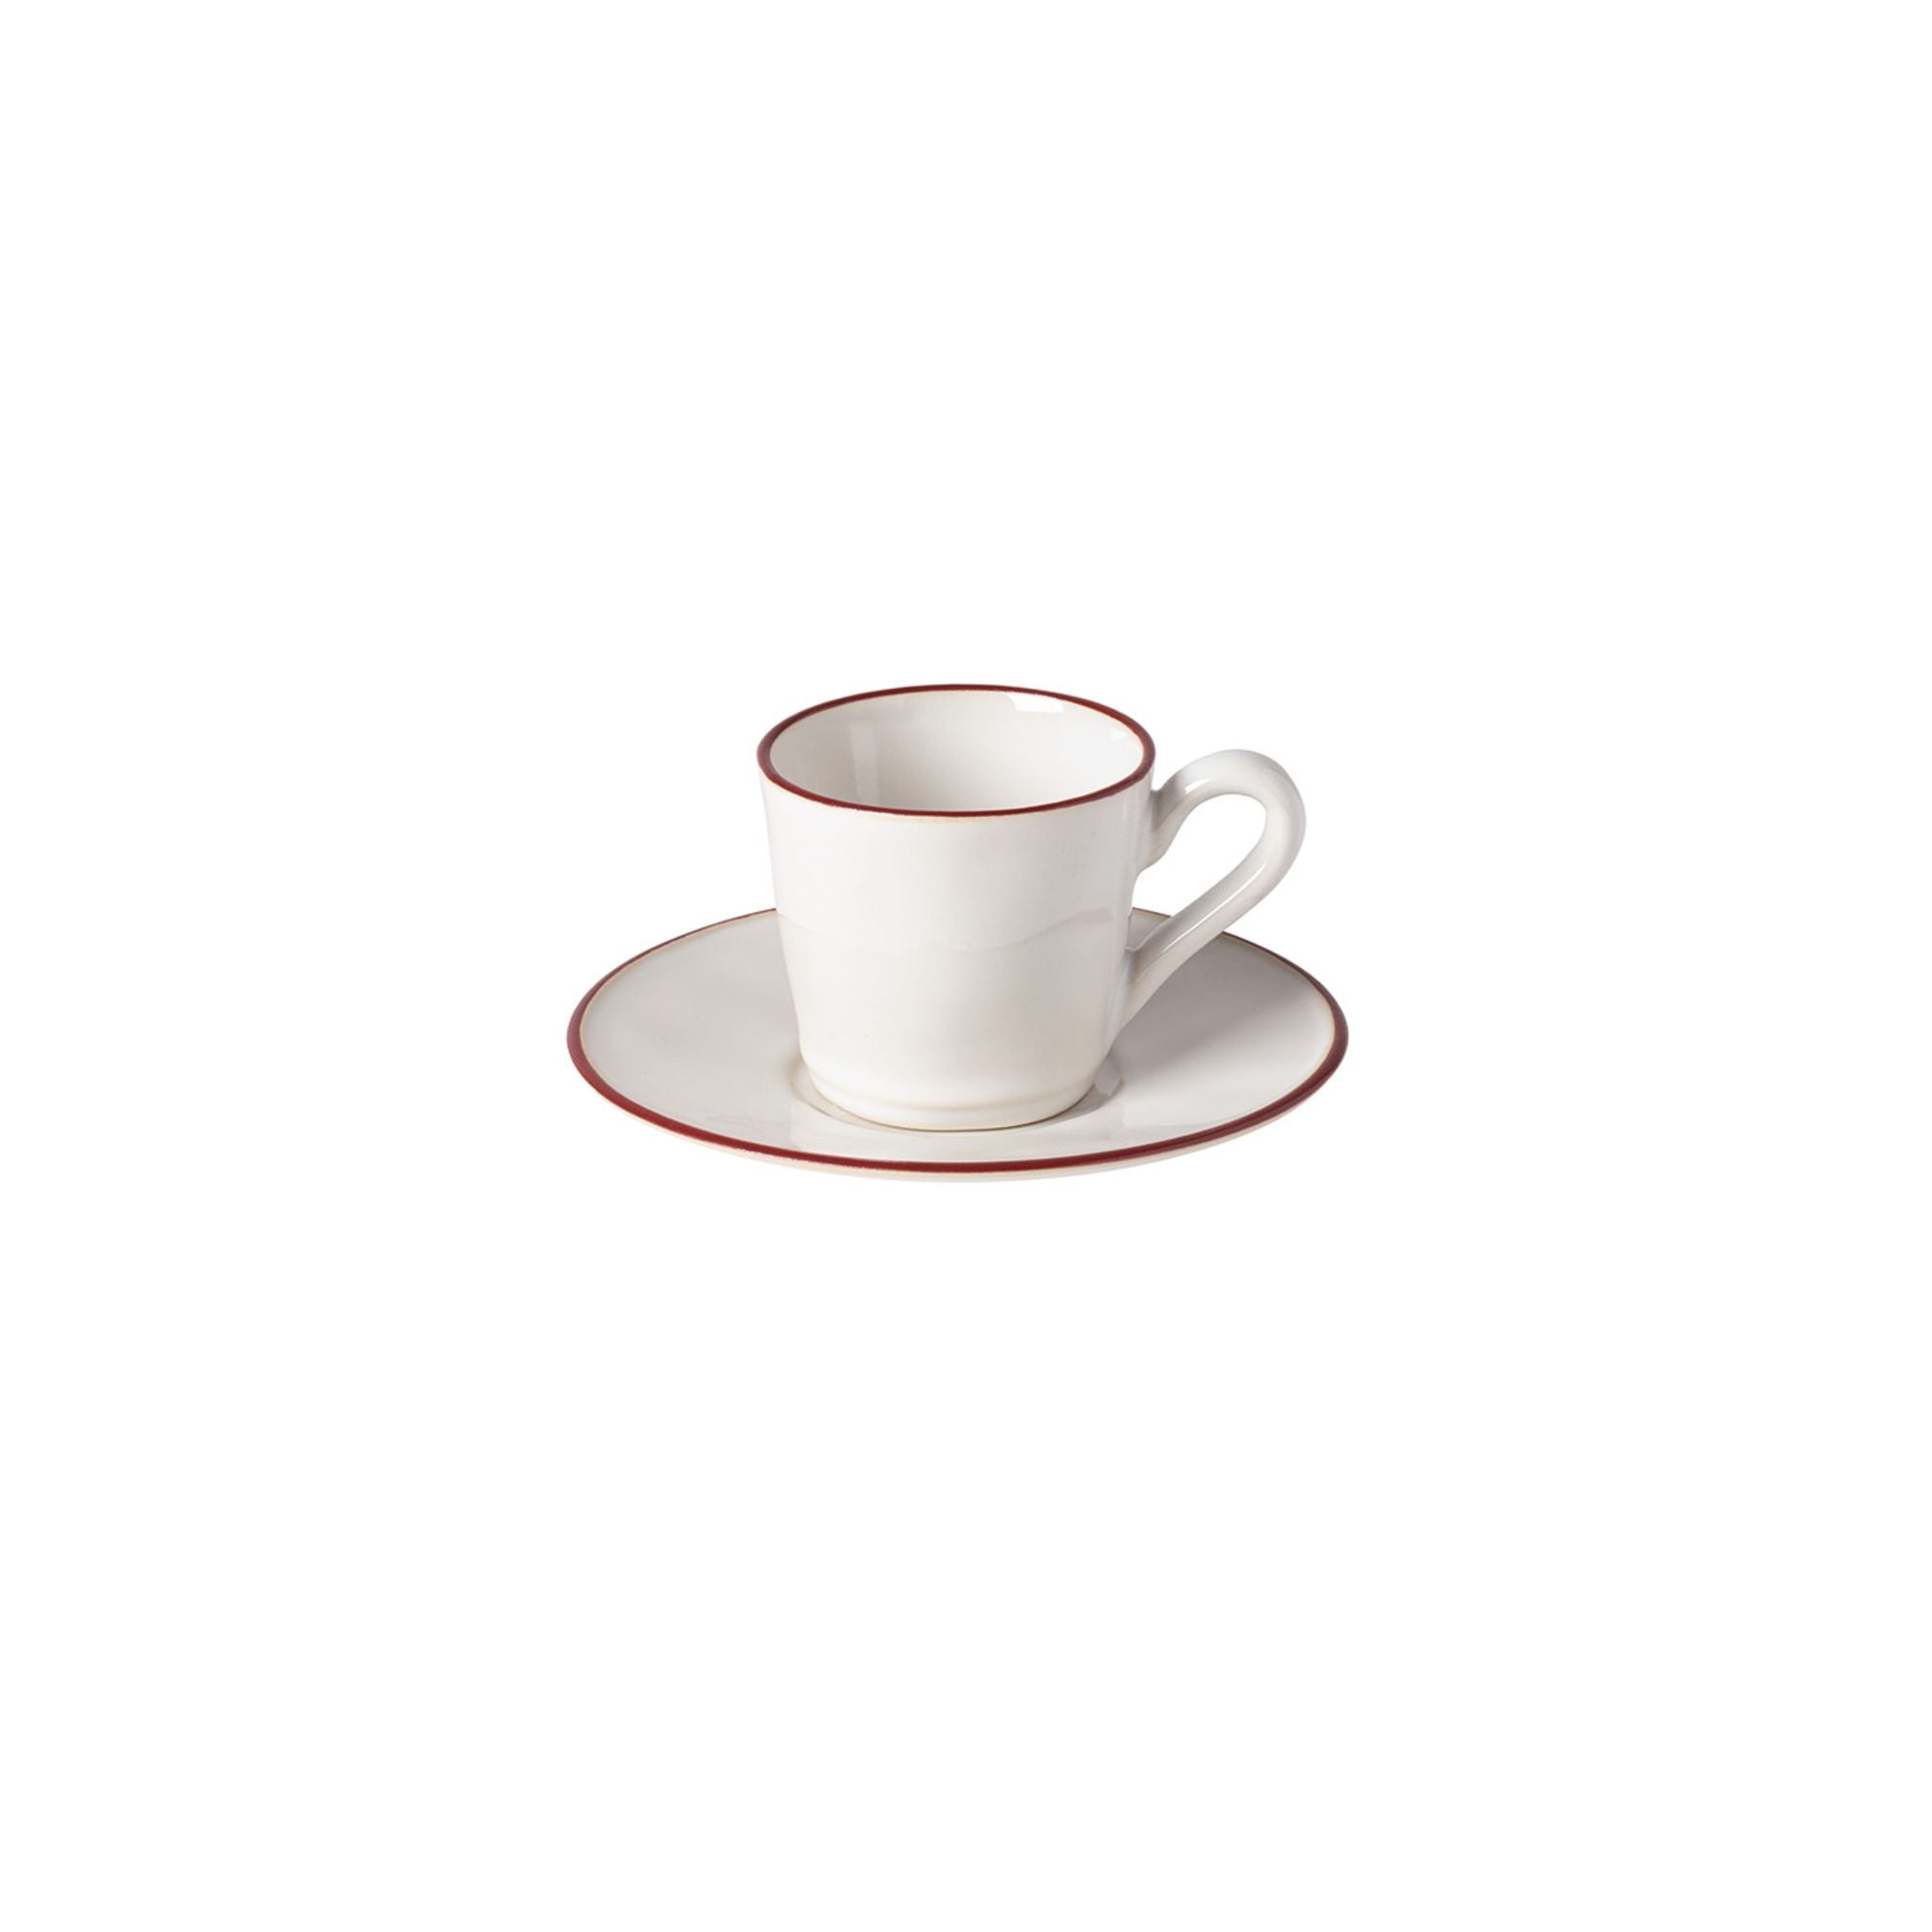 Beja Tea Cup and Saucer 6 oz. White-Red